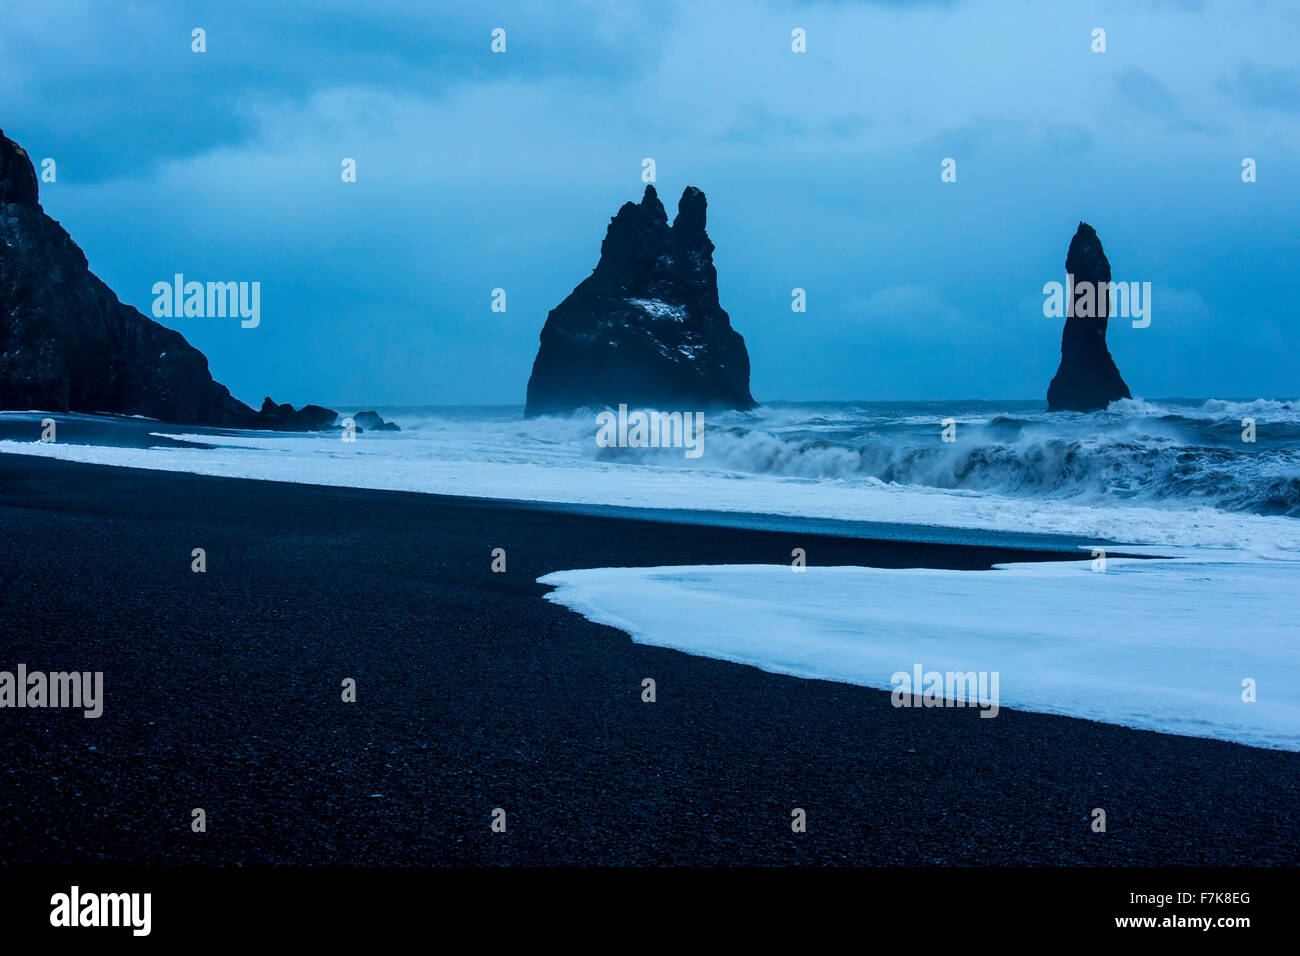 Rock formations and stormy ocean at dusk, Reynisdrangar, Vik, Iceland Stock Photo